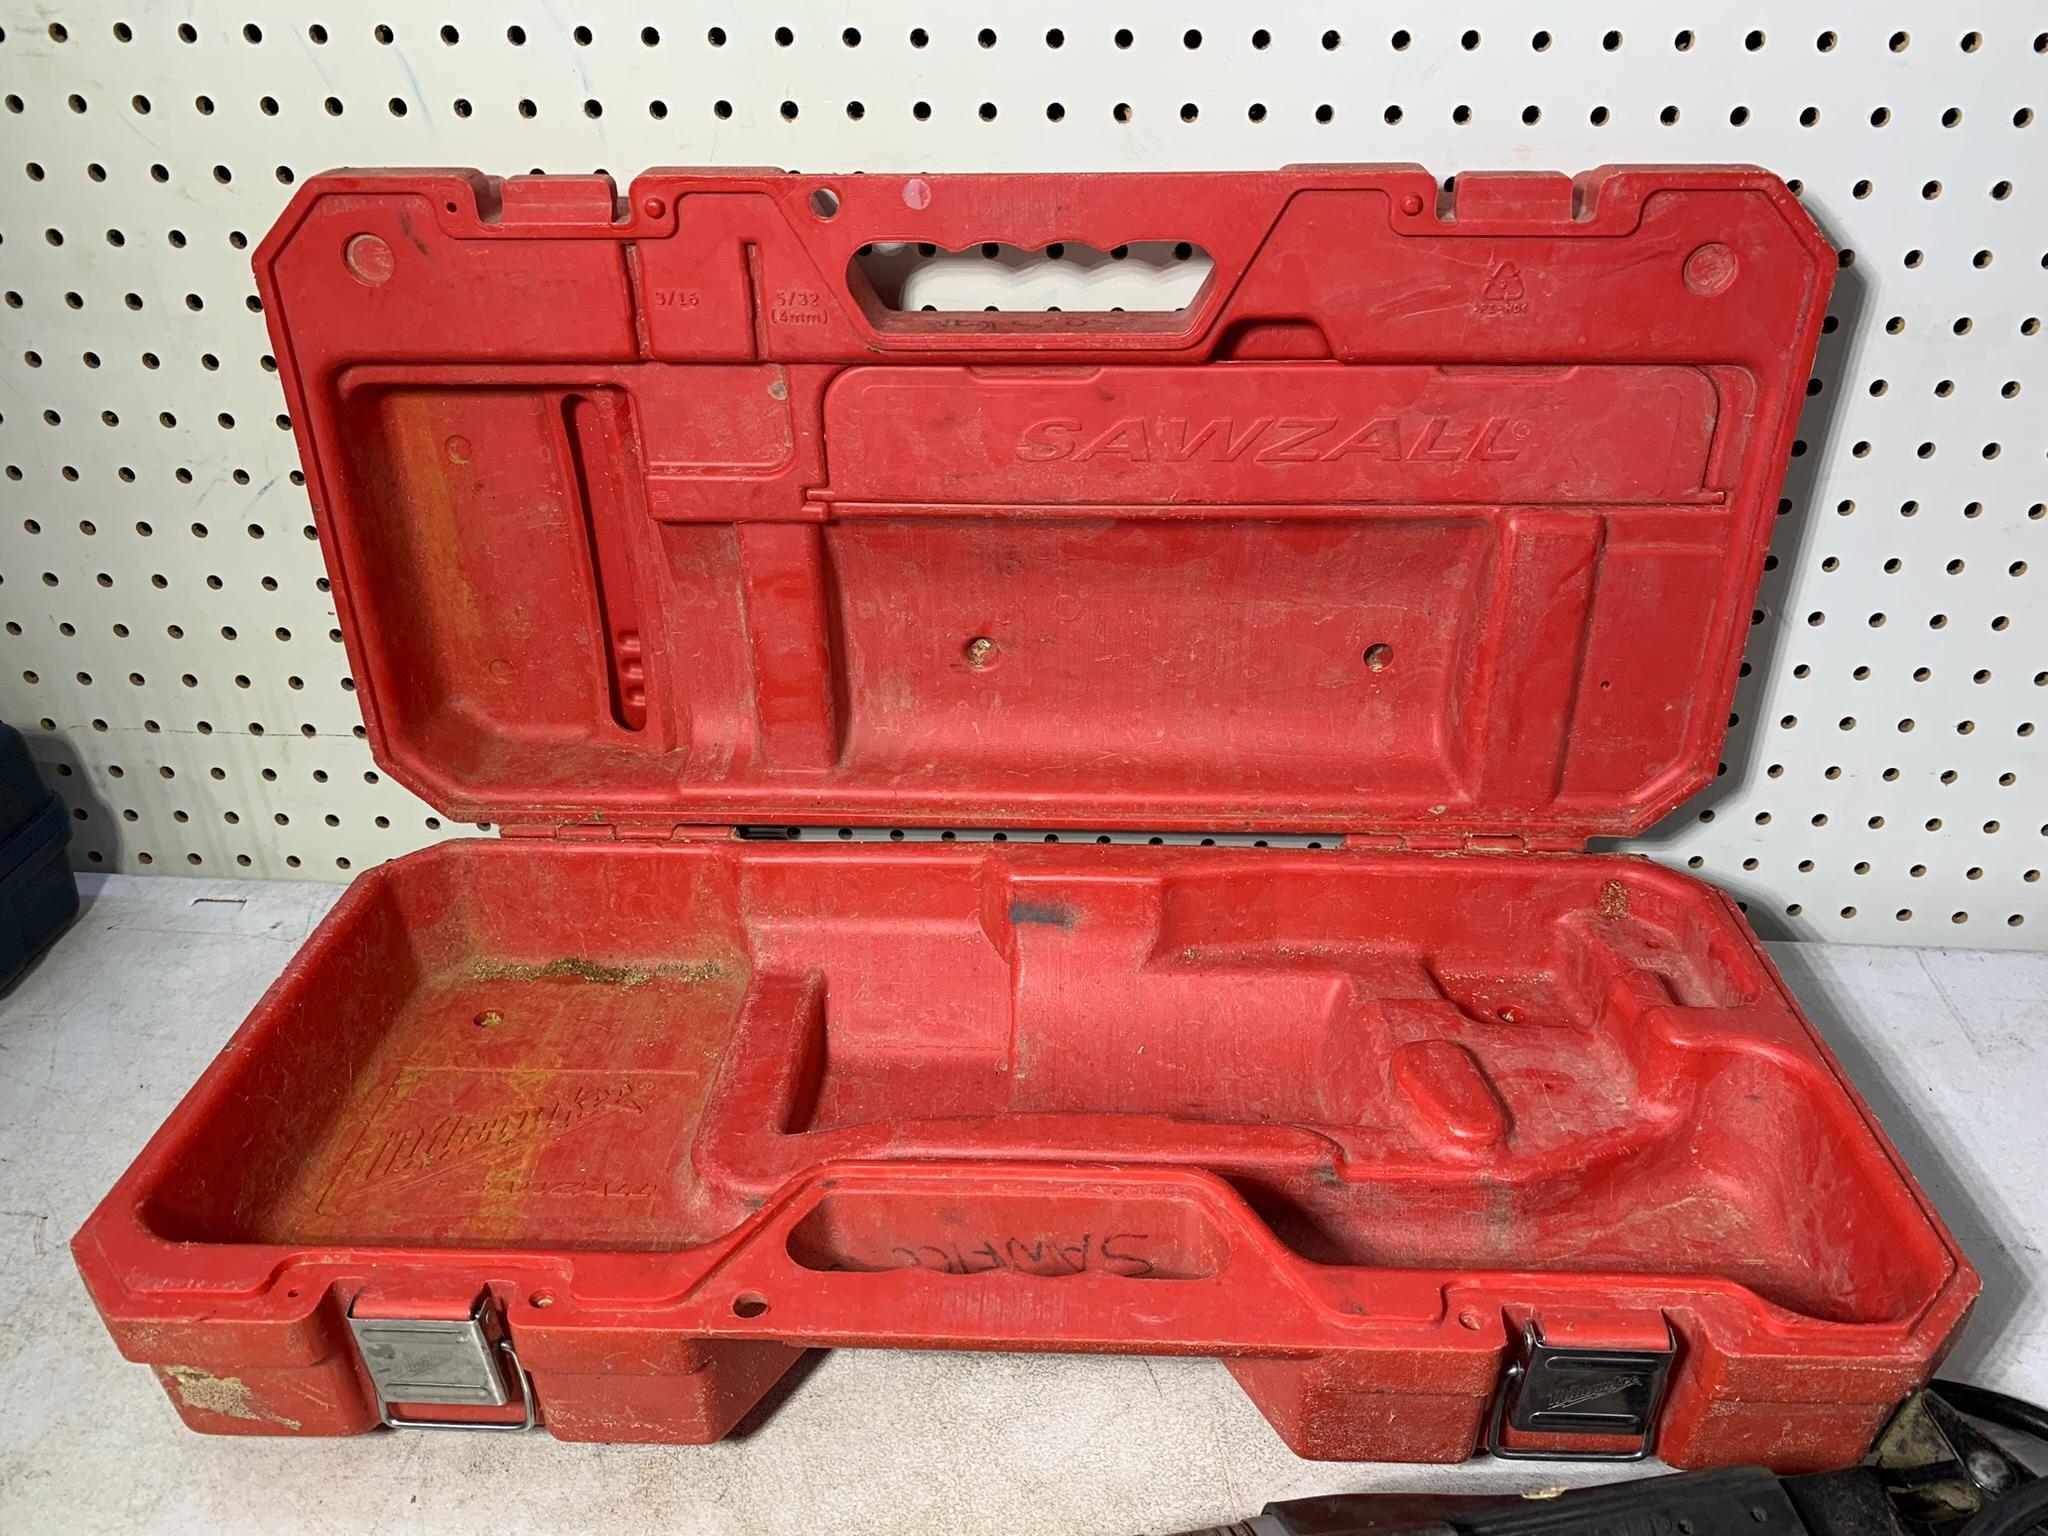 2 Milwaukee Reciprocating Saws with One Case